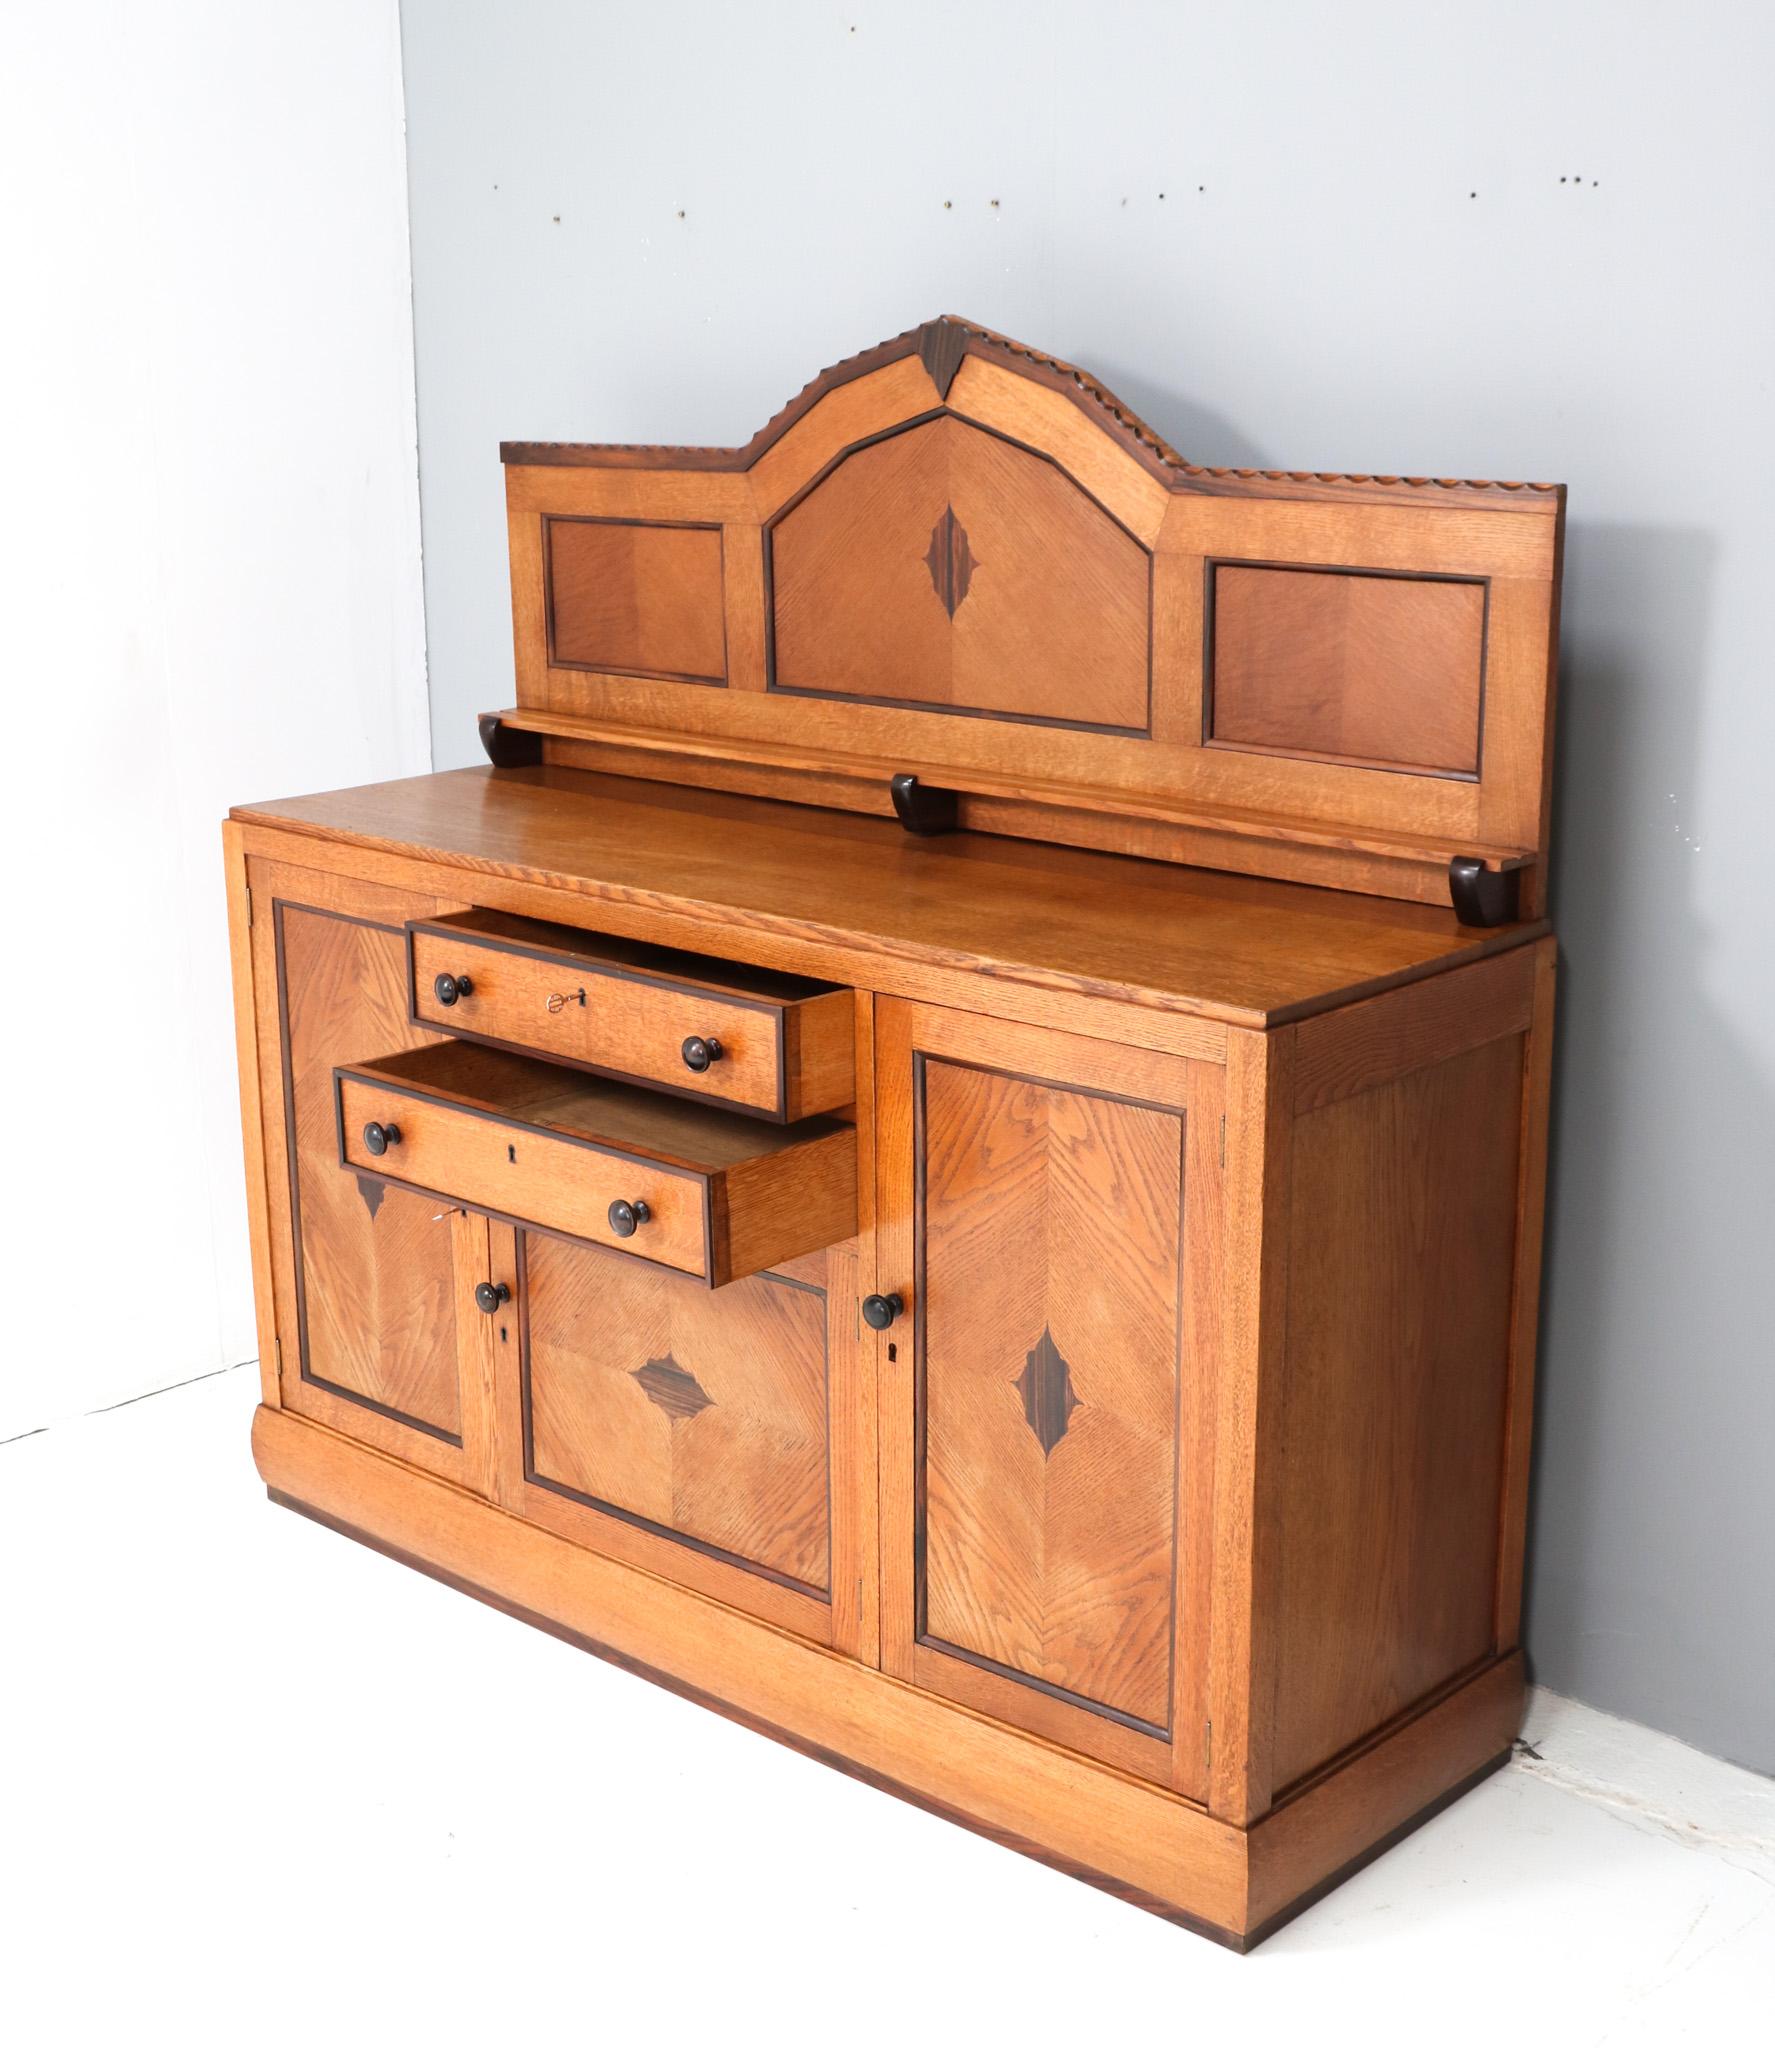 Early 20th Century Oak Art Deco Amsterdamse School Credenza or Sideboard by Fa. Drilling, 1924 For Sale